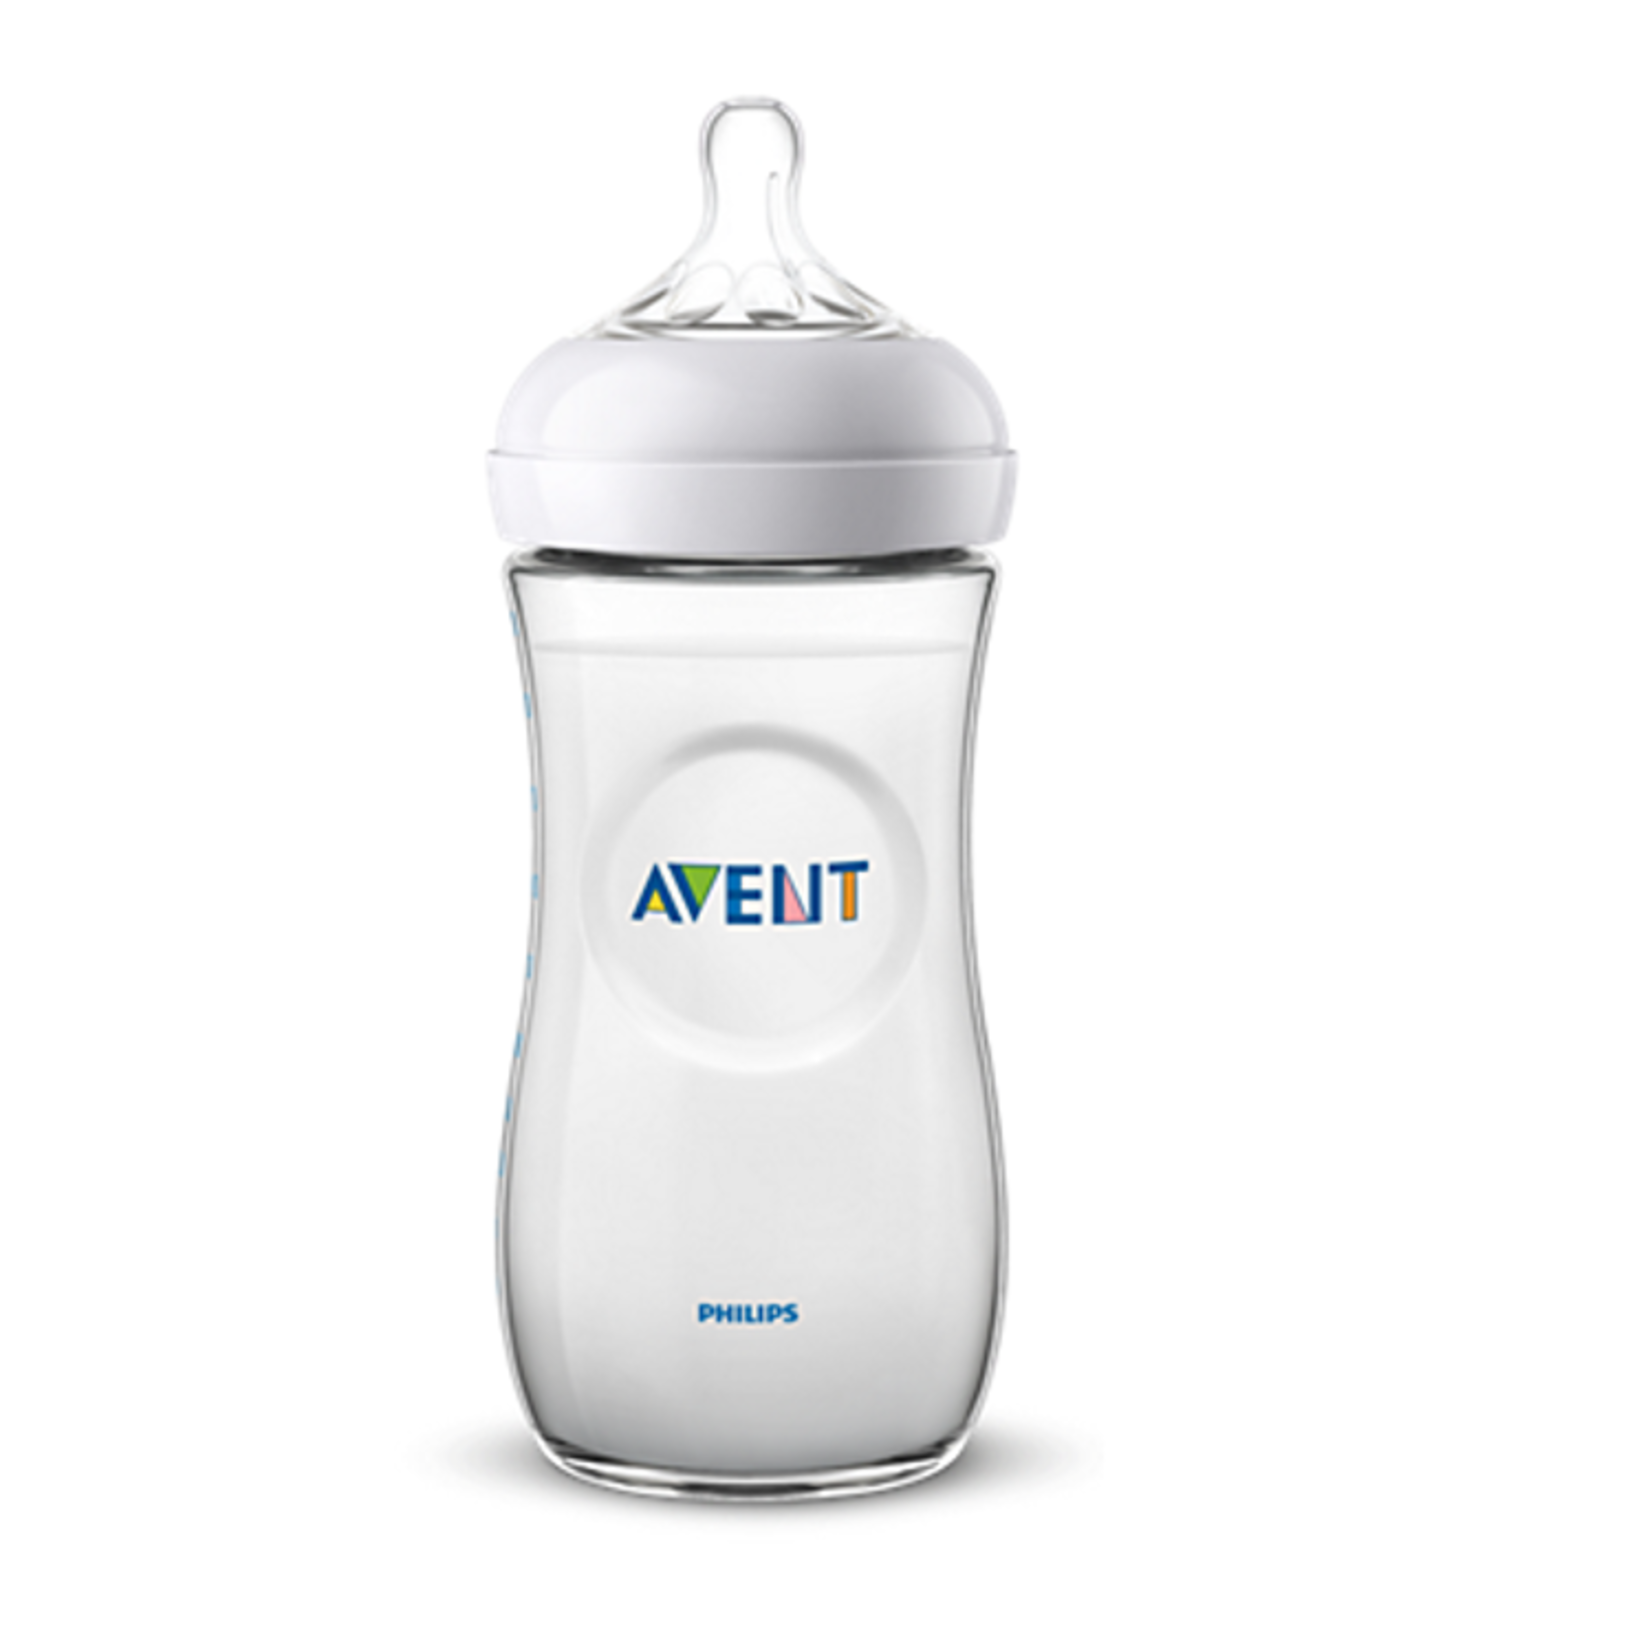 Avent Avent Natural zuigfles 330ml